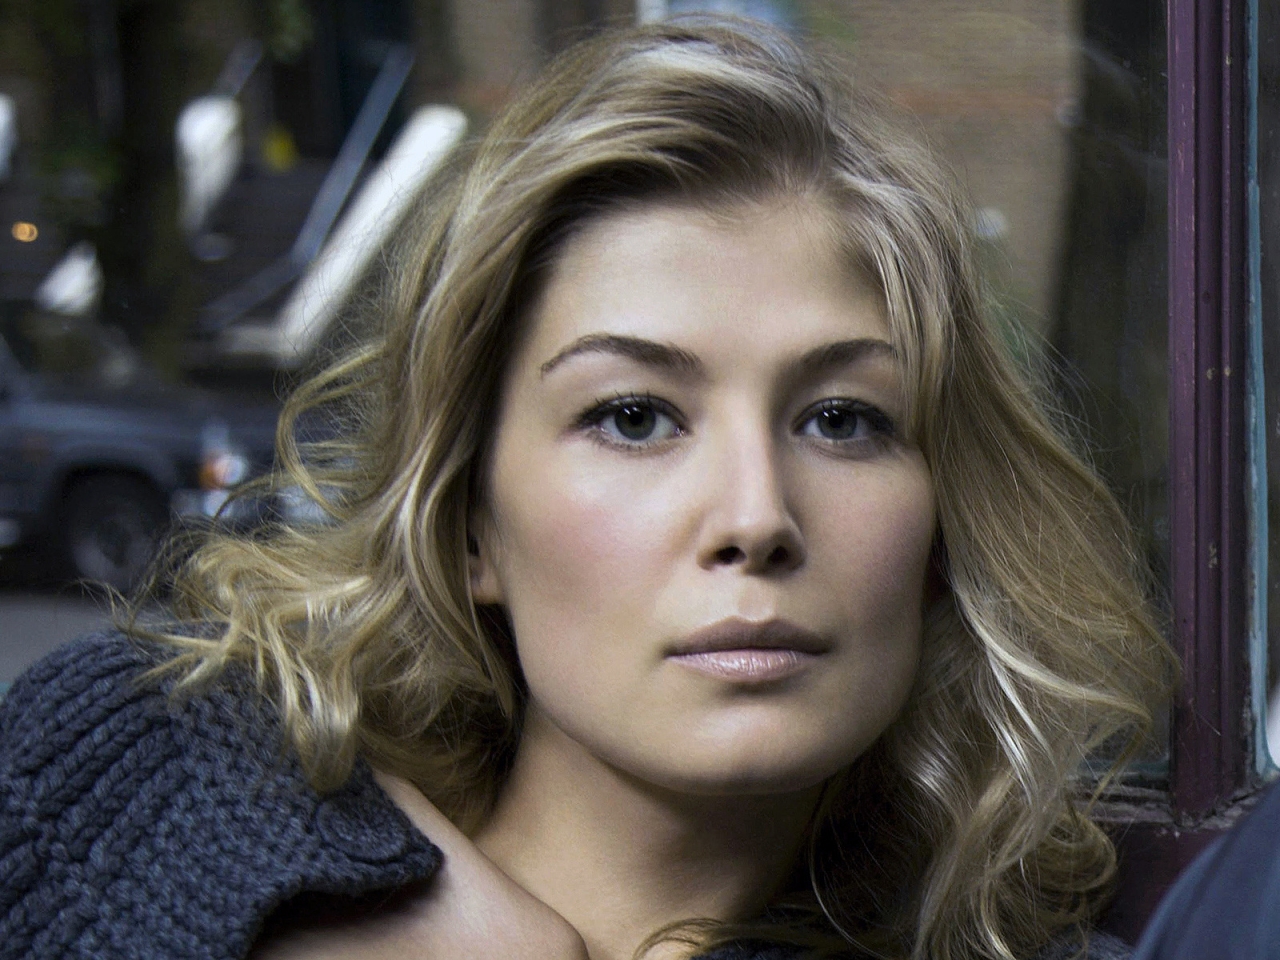 Rosamund Pike Look for 1280 x 960 resolution